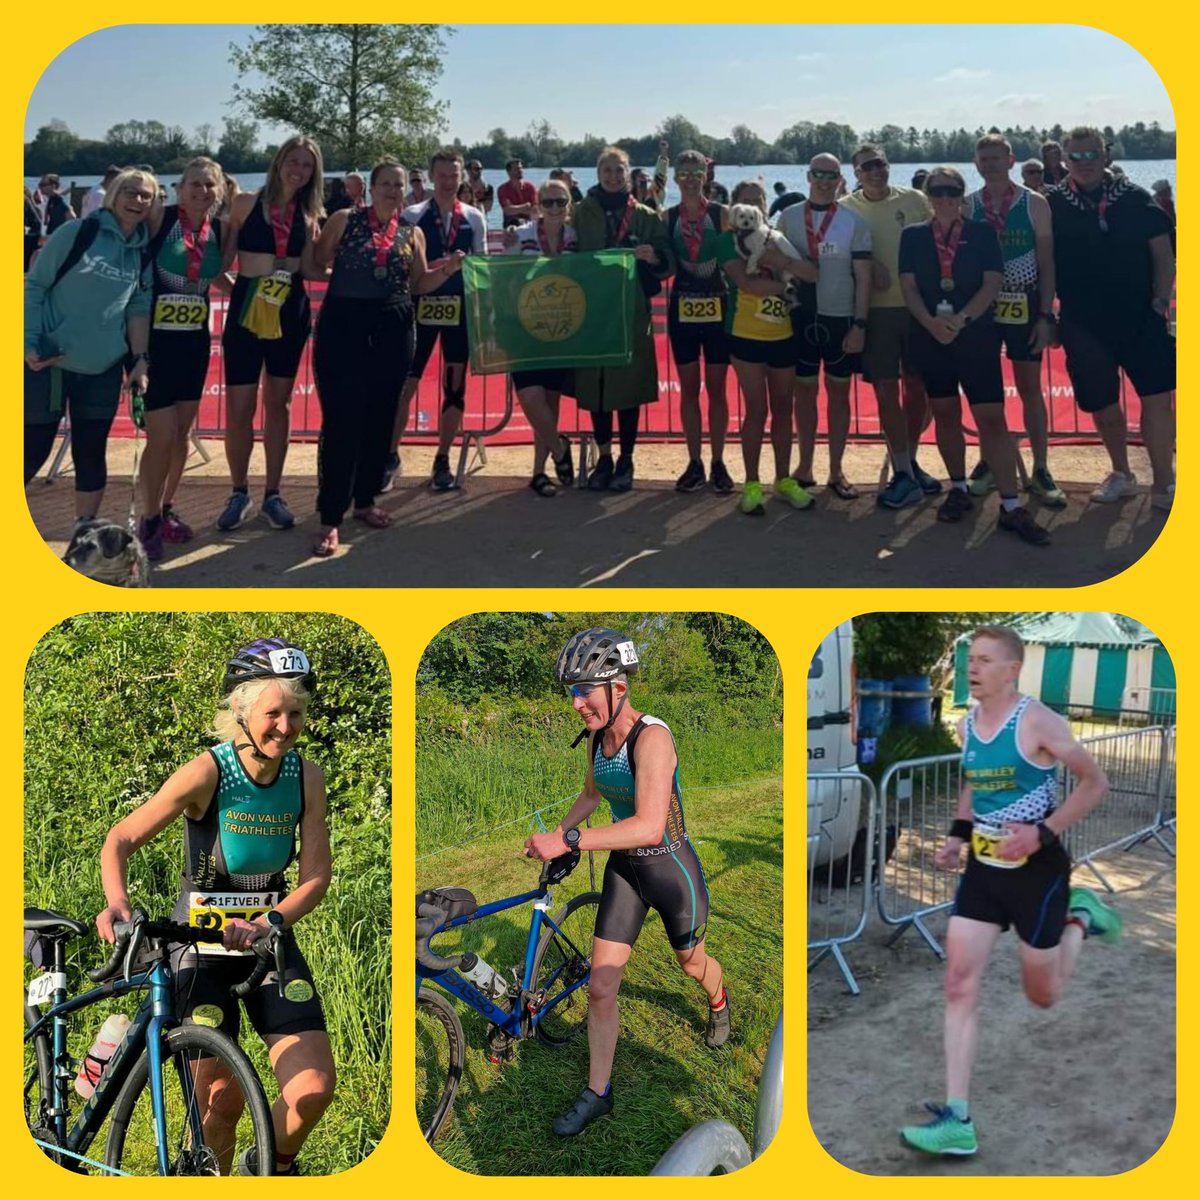 AVT had a great event yesterday at the @dbmaxevents 51 Fiver Triathlon.